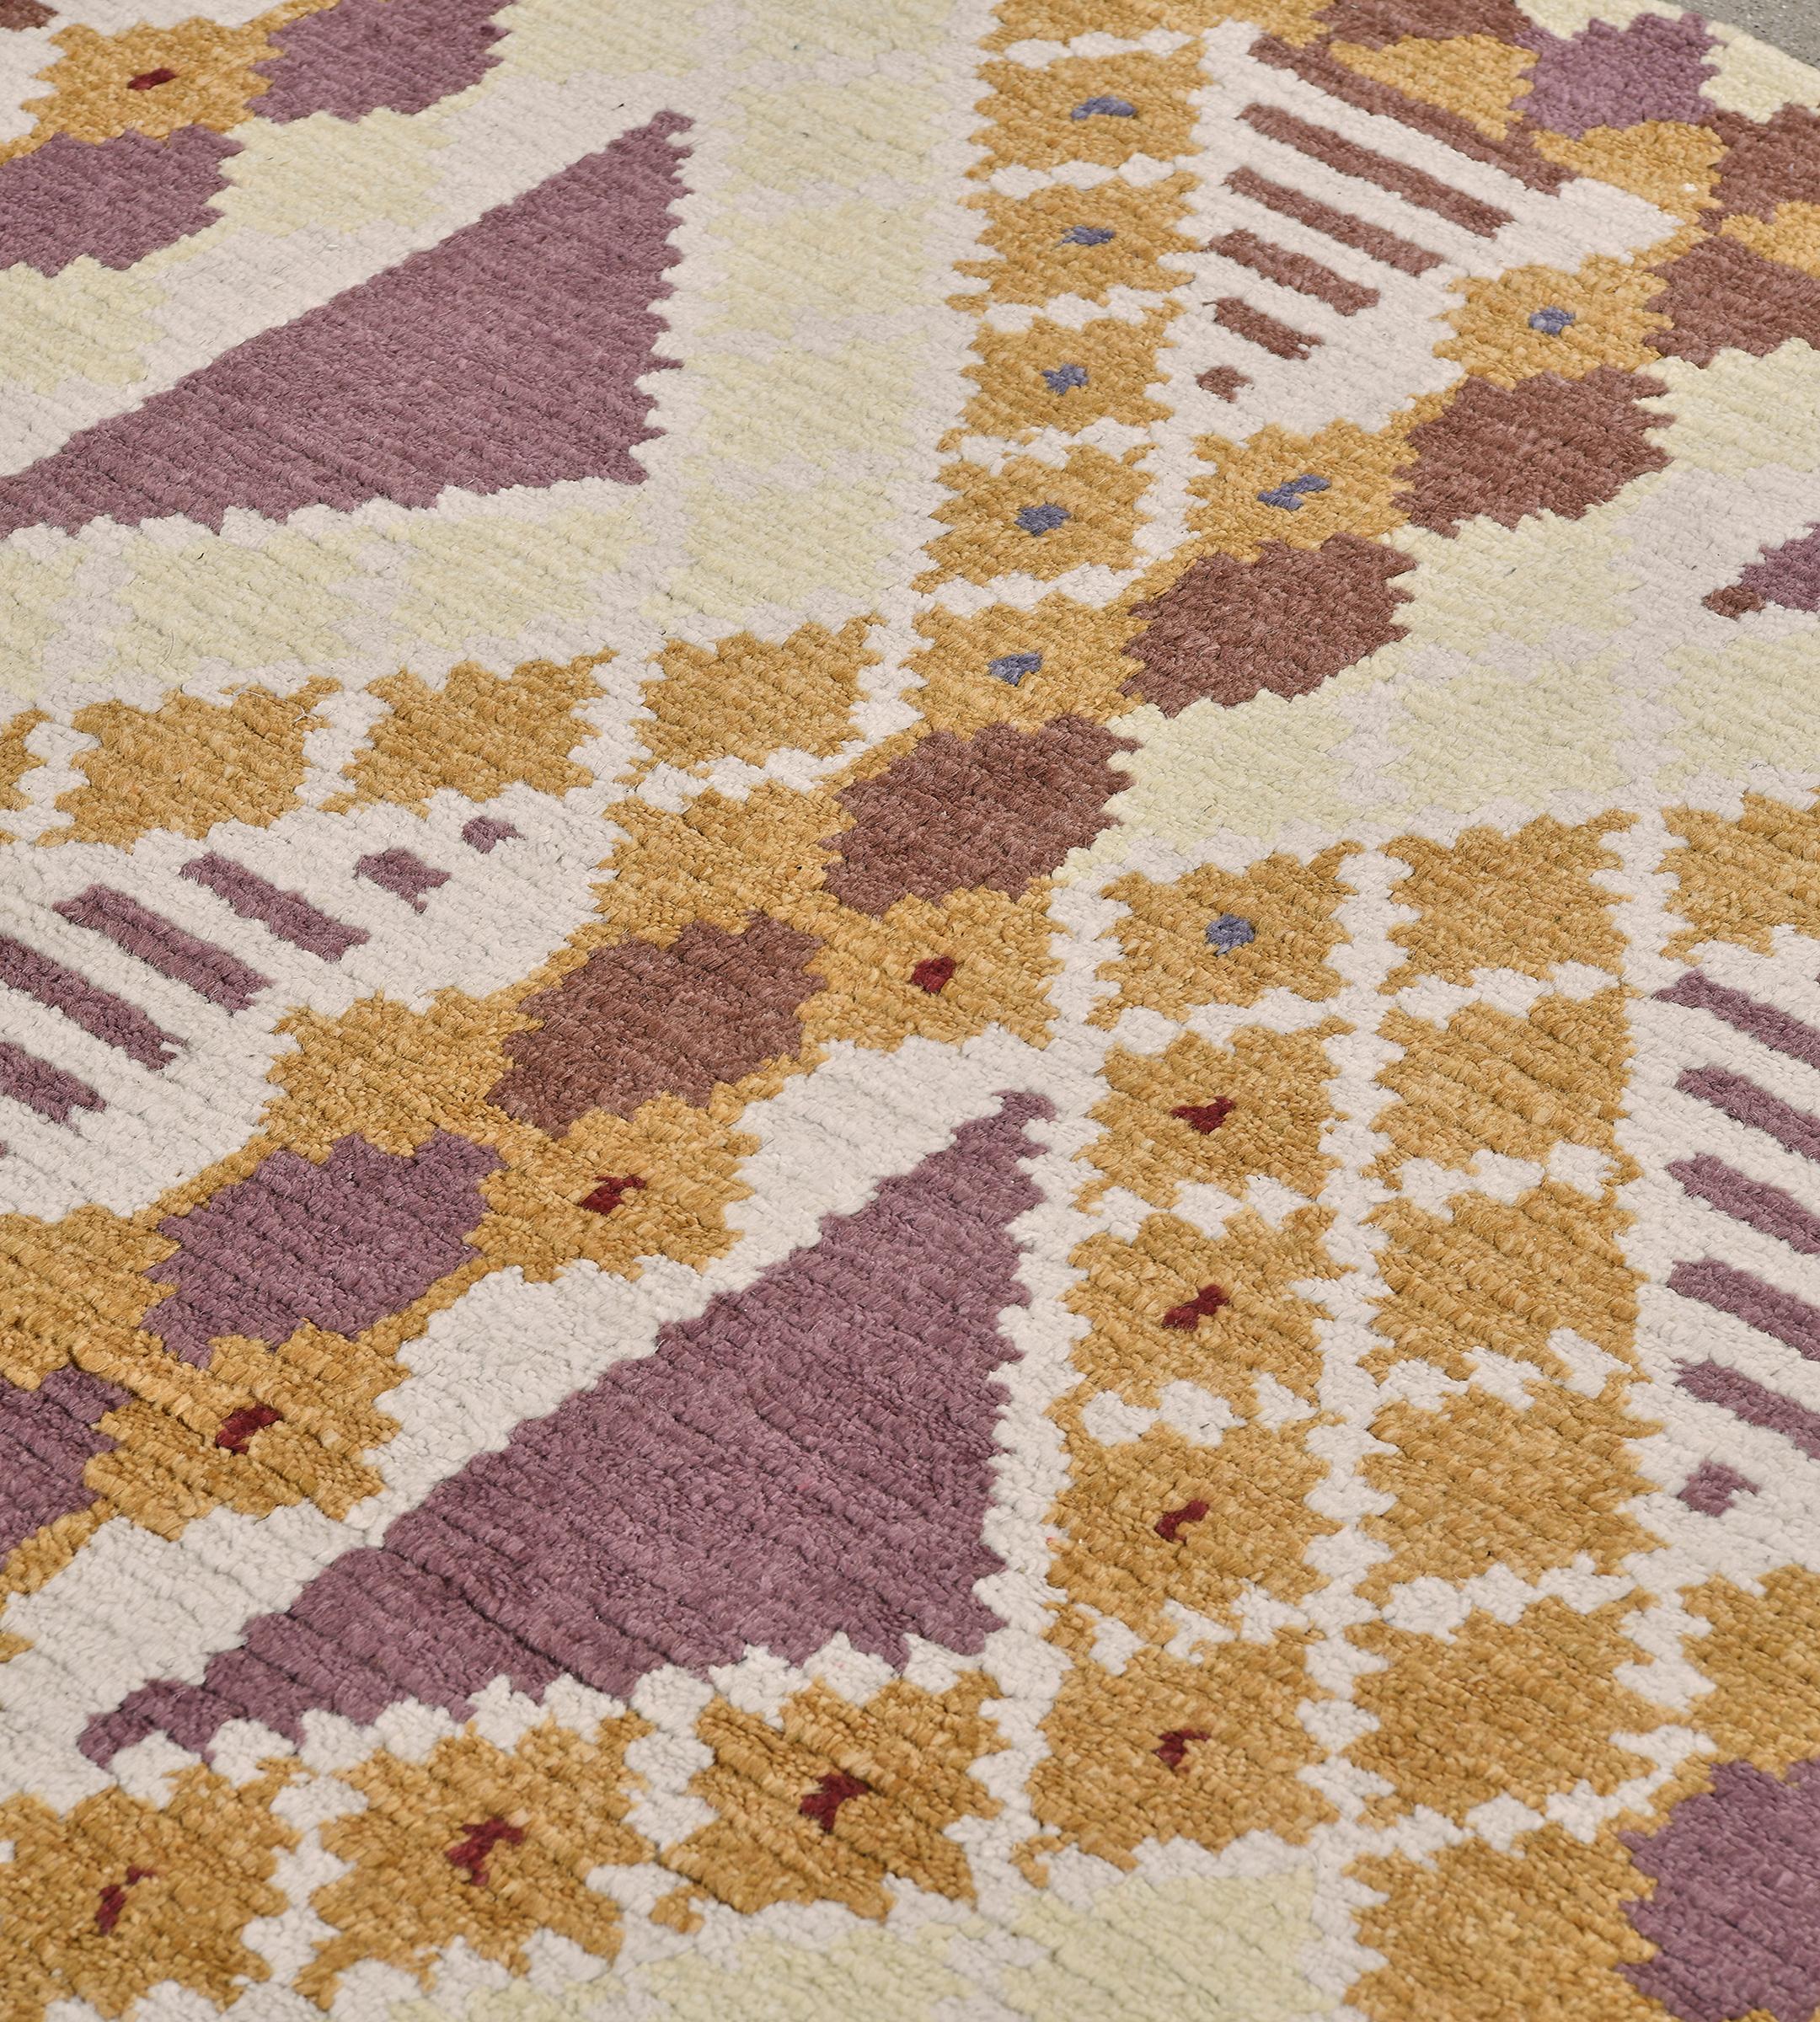 This 21st century, deco-inspired rug has outstanding color and pattern combinations Sized at 6” x 9”; its simple design of rectilinear figures set against the minimally adorned field effortlessly adds a playful tone to any space.